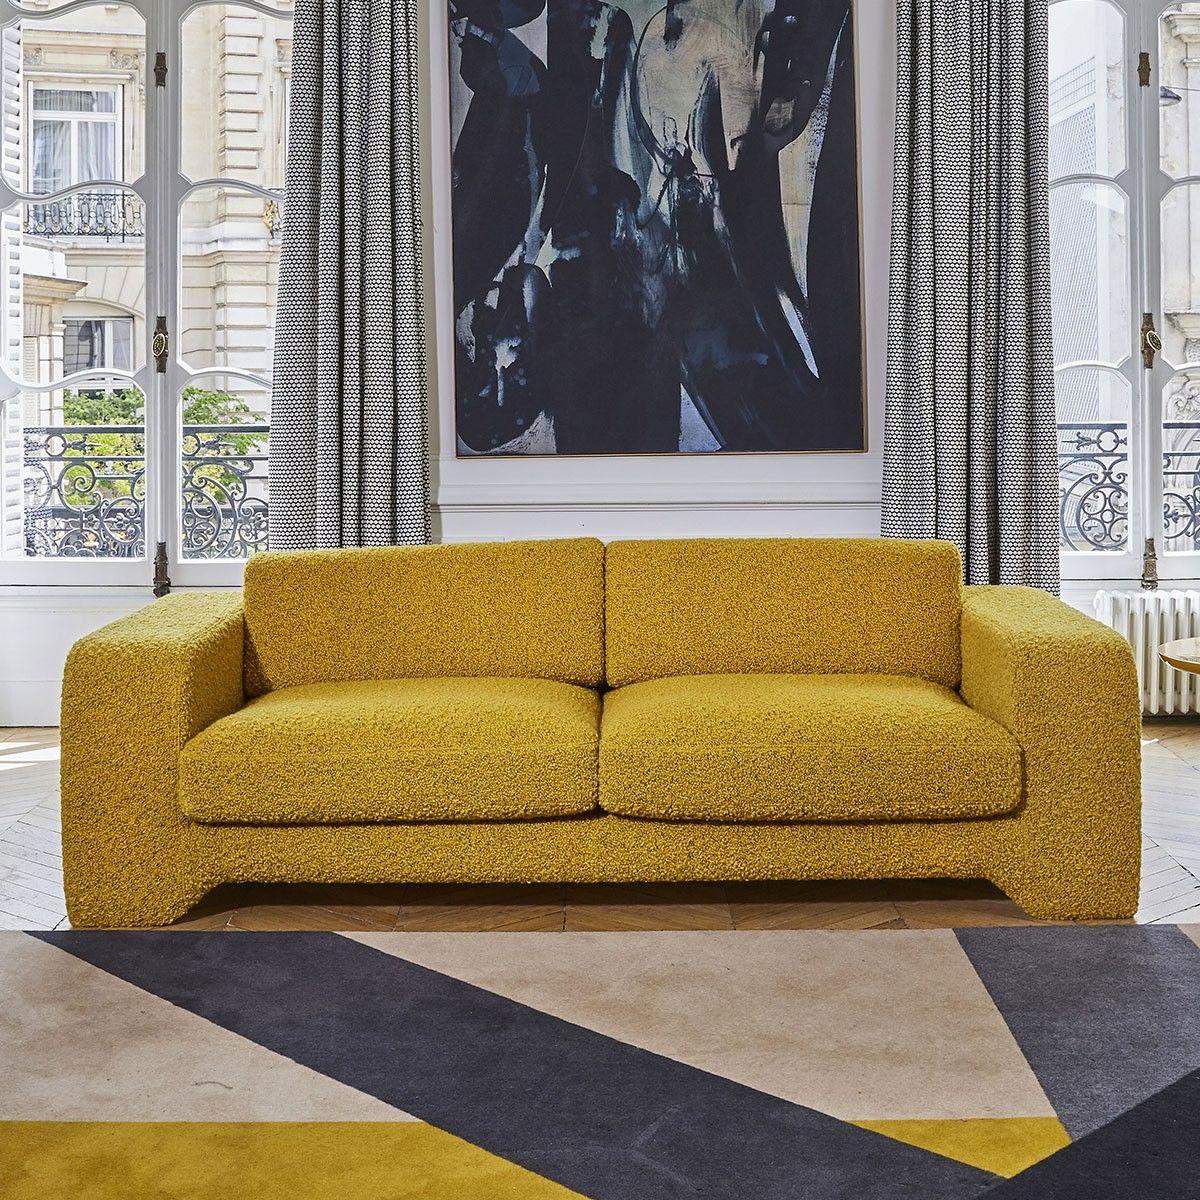 Popus Editions Giovanna 3 Seater Sofa in Blue Como Velvet Upholstery.

Giovanna is a sofa with a strong profile. A sober, plush line, with this famous detail that changes everything, so as not to forget its strength of character and this charming